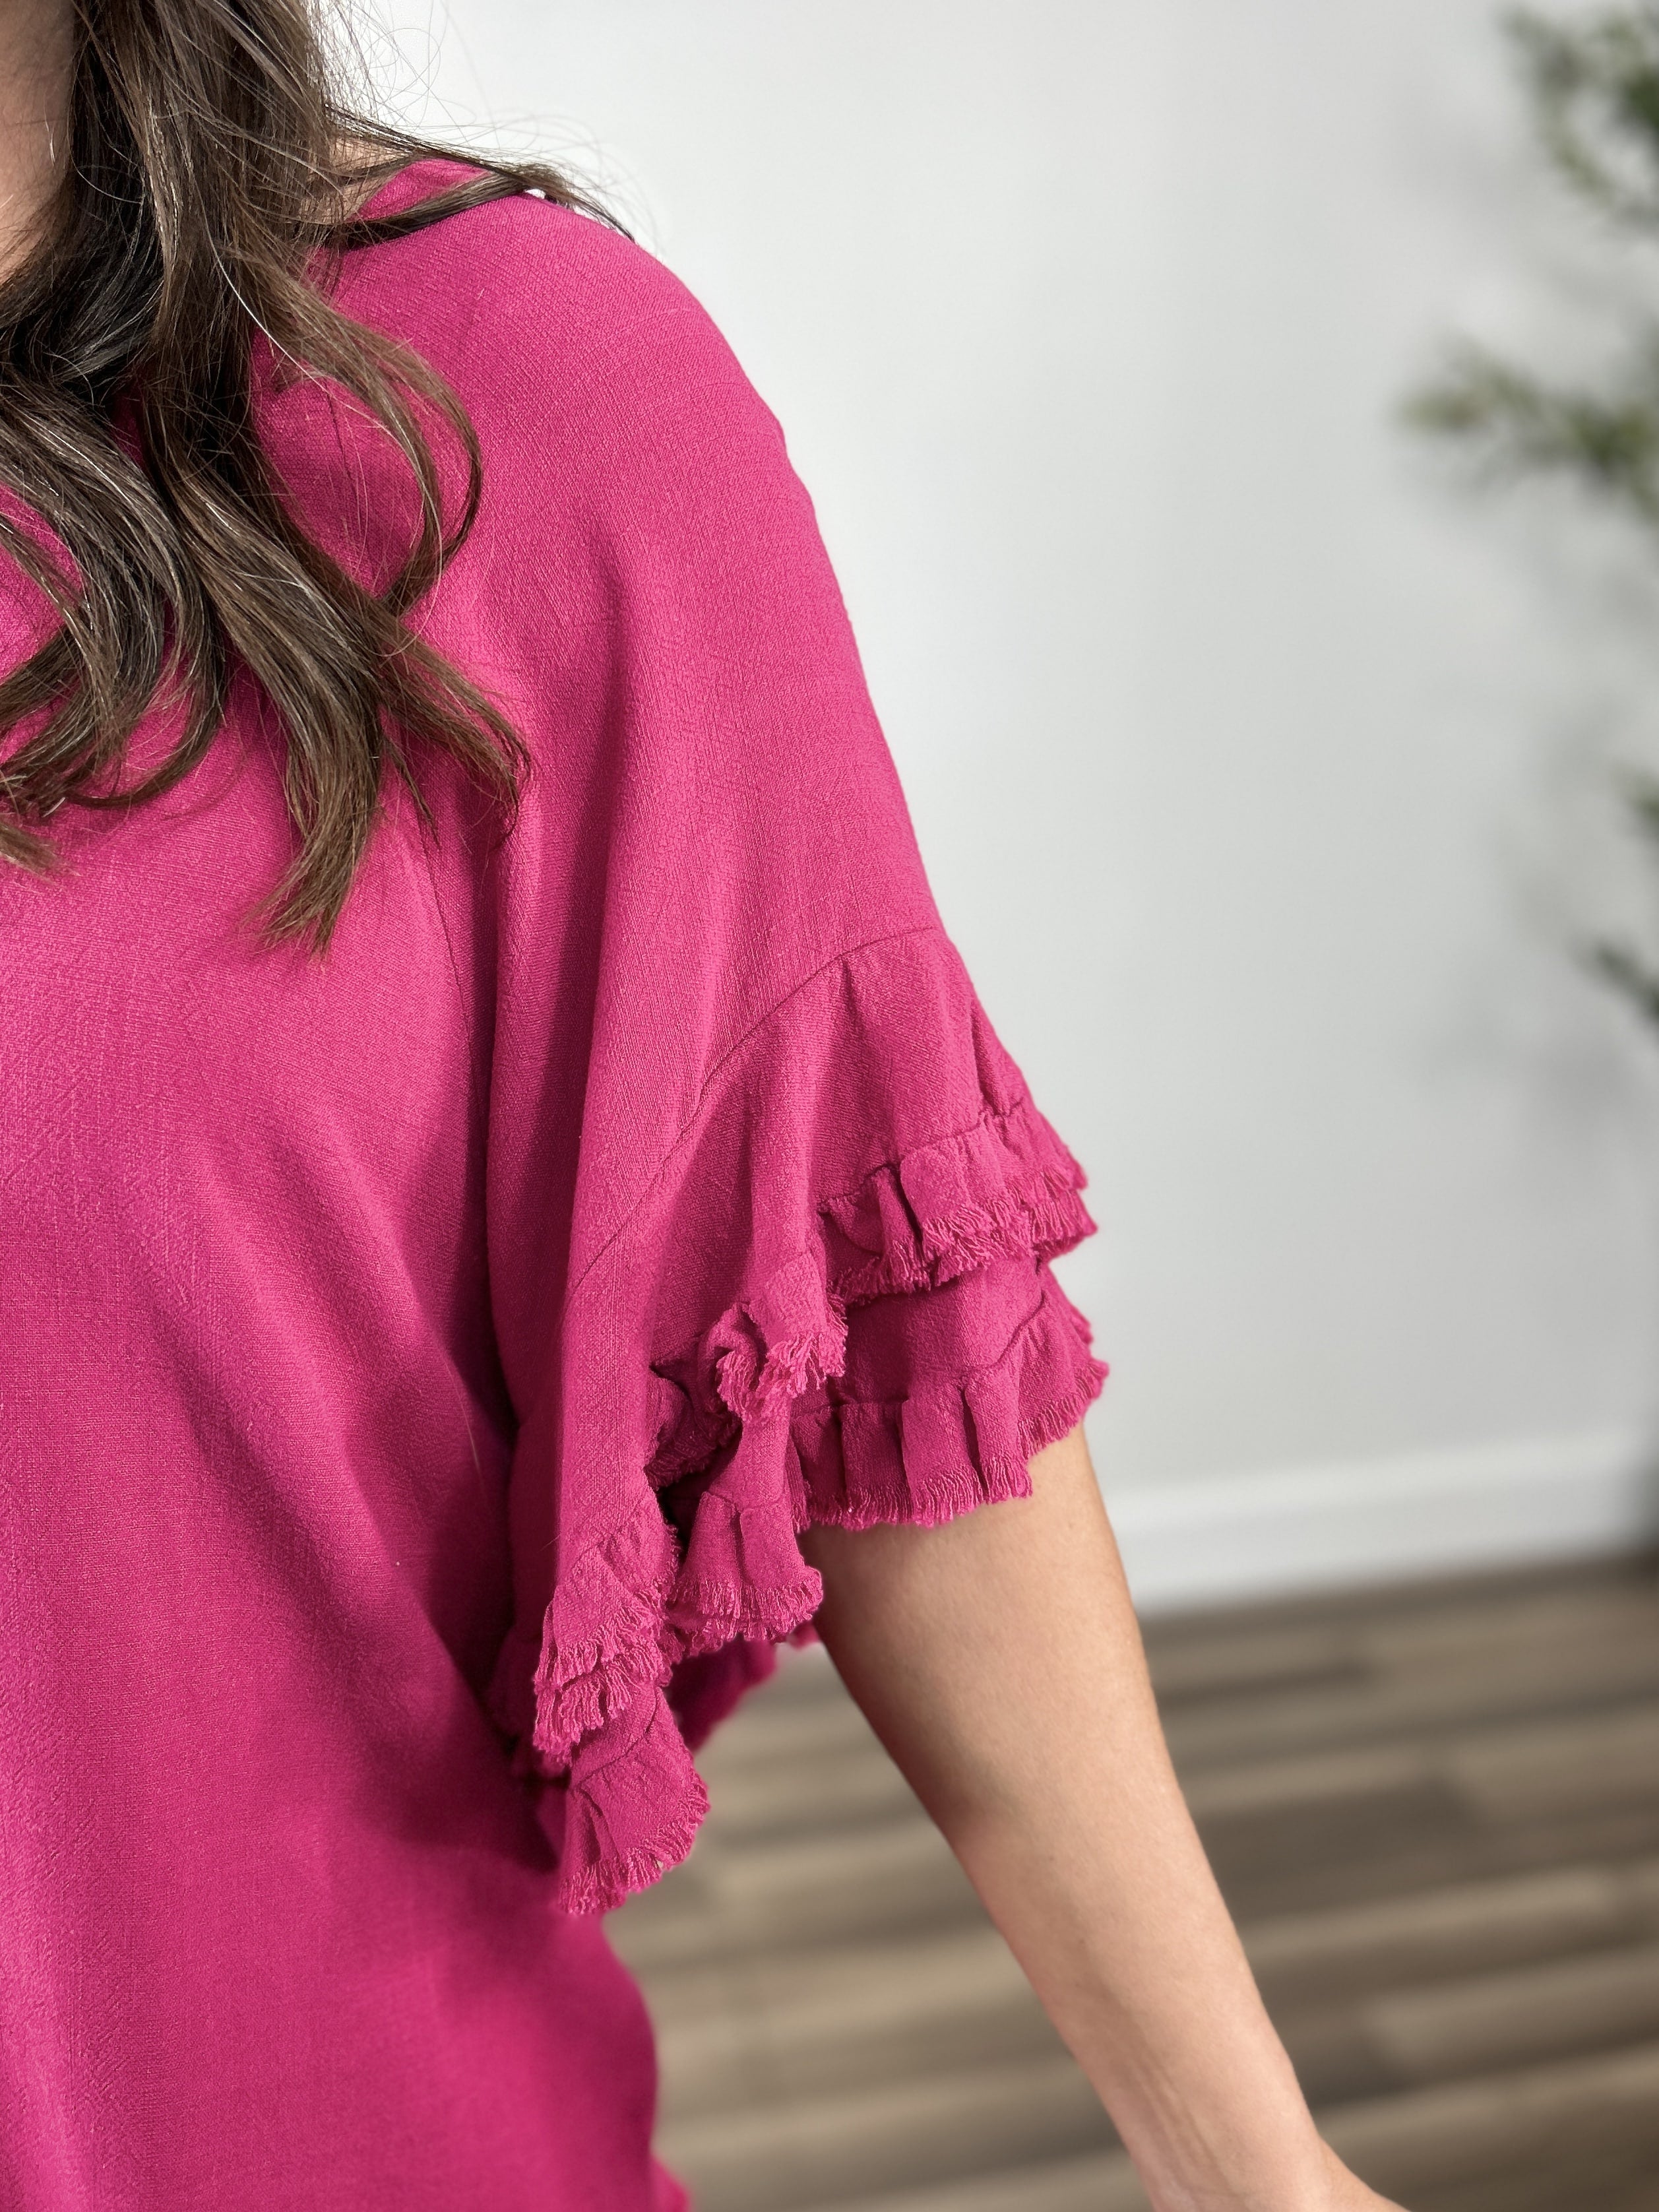 Upclose view of the women's fuchsia color ruffle sleeve top. Showing the double tier ruffle with frayed hem detailing.